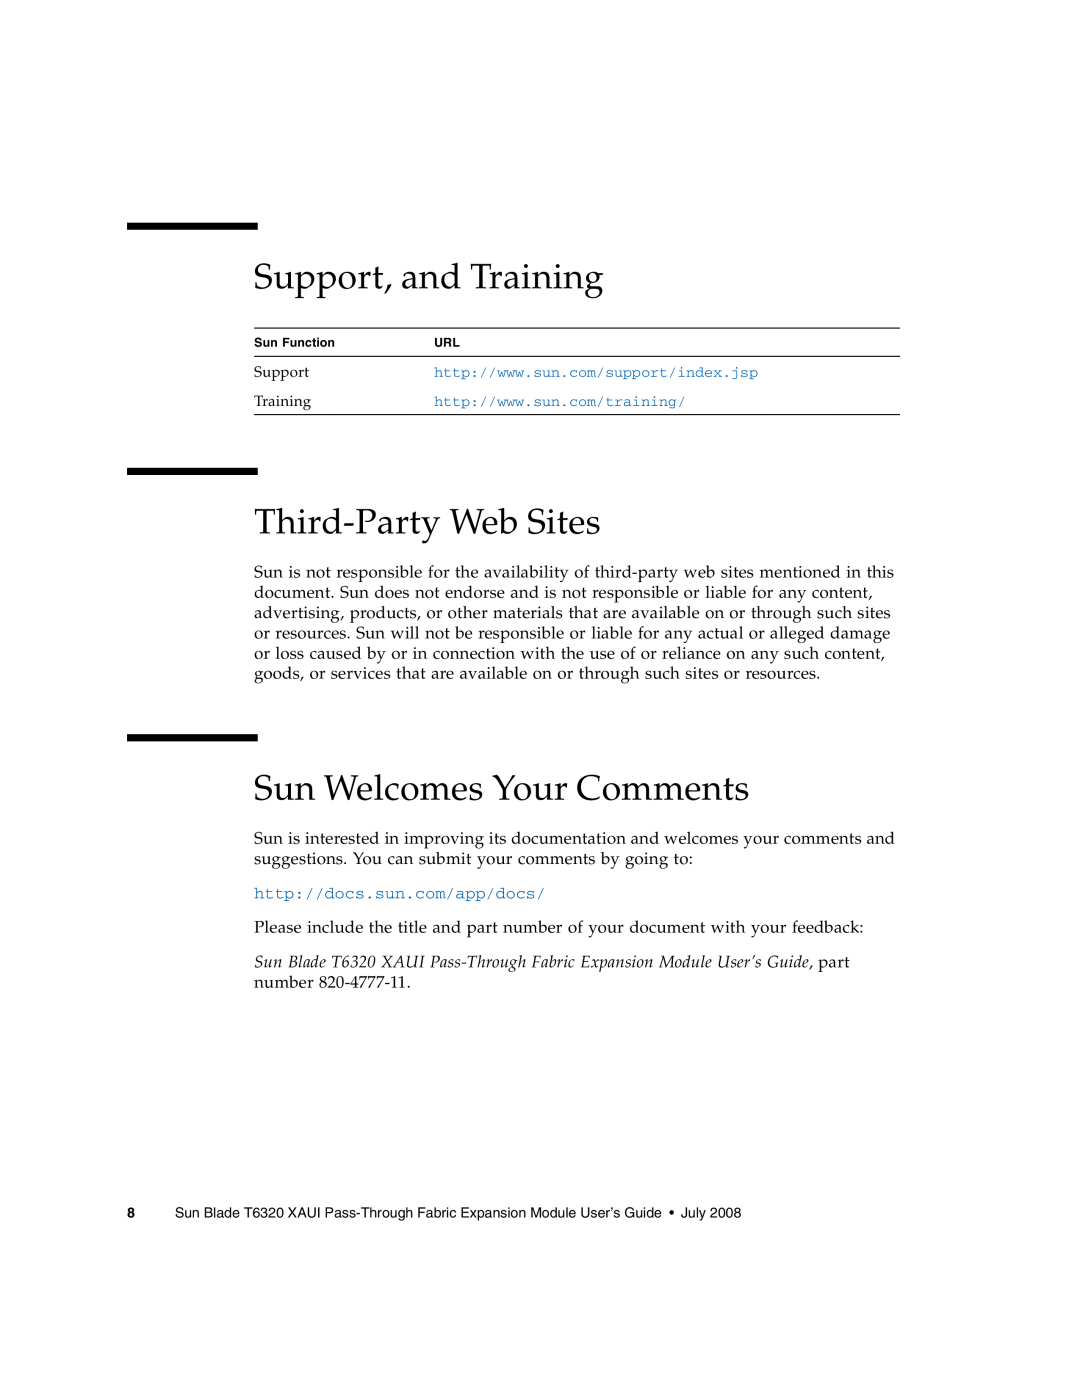 Sun Microsystems T6320 manual Support, and Training, Third-Party Web Sites, Sun Welcomes Your Comments 